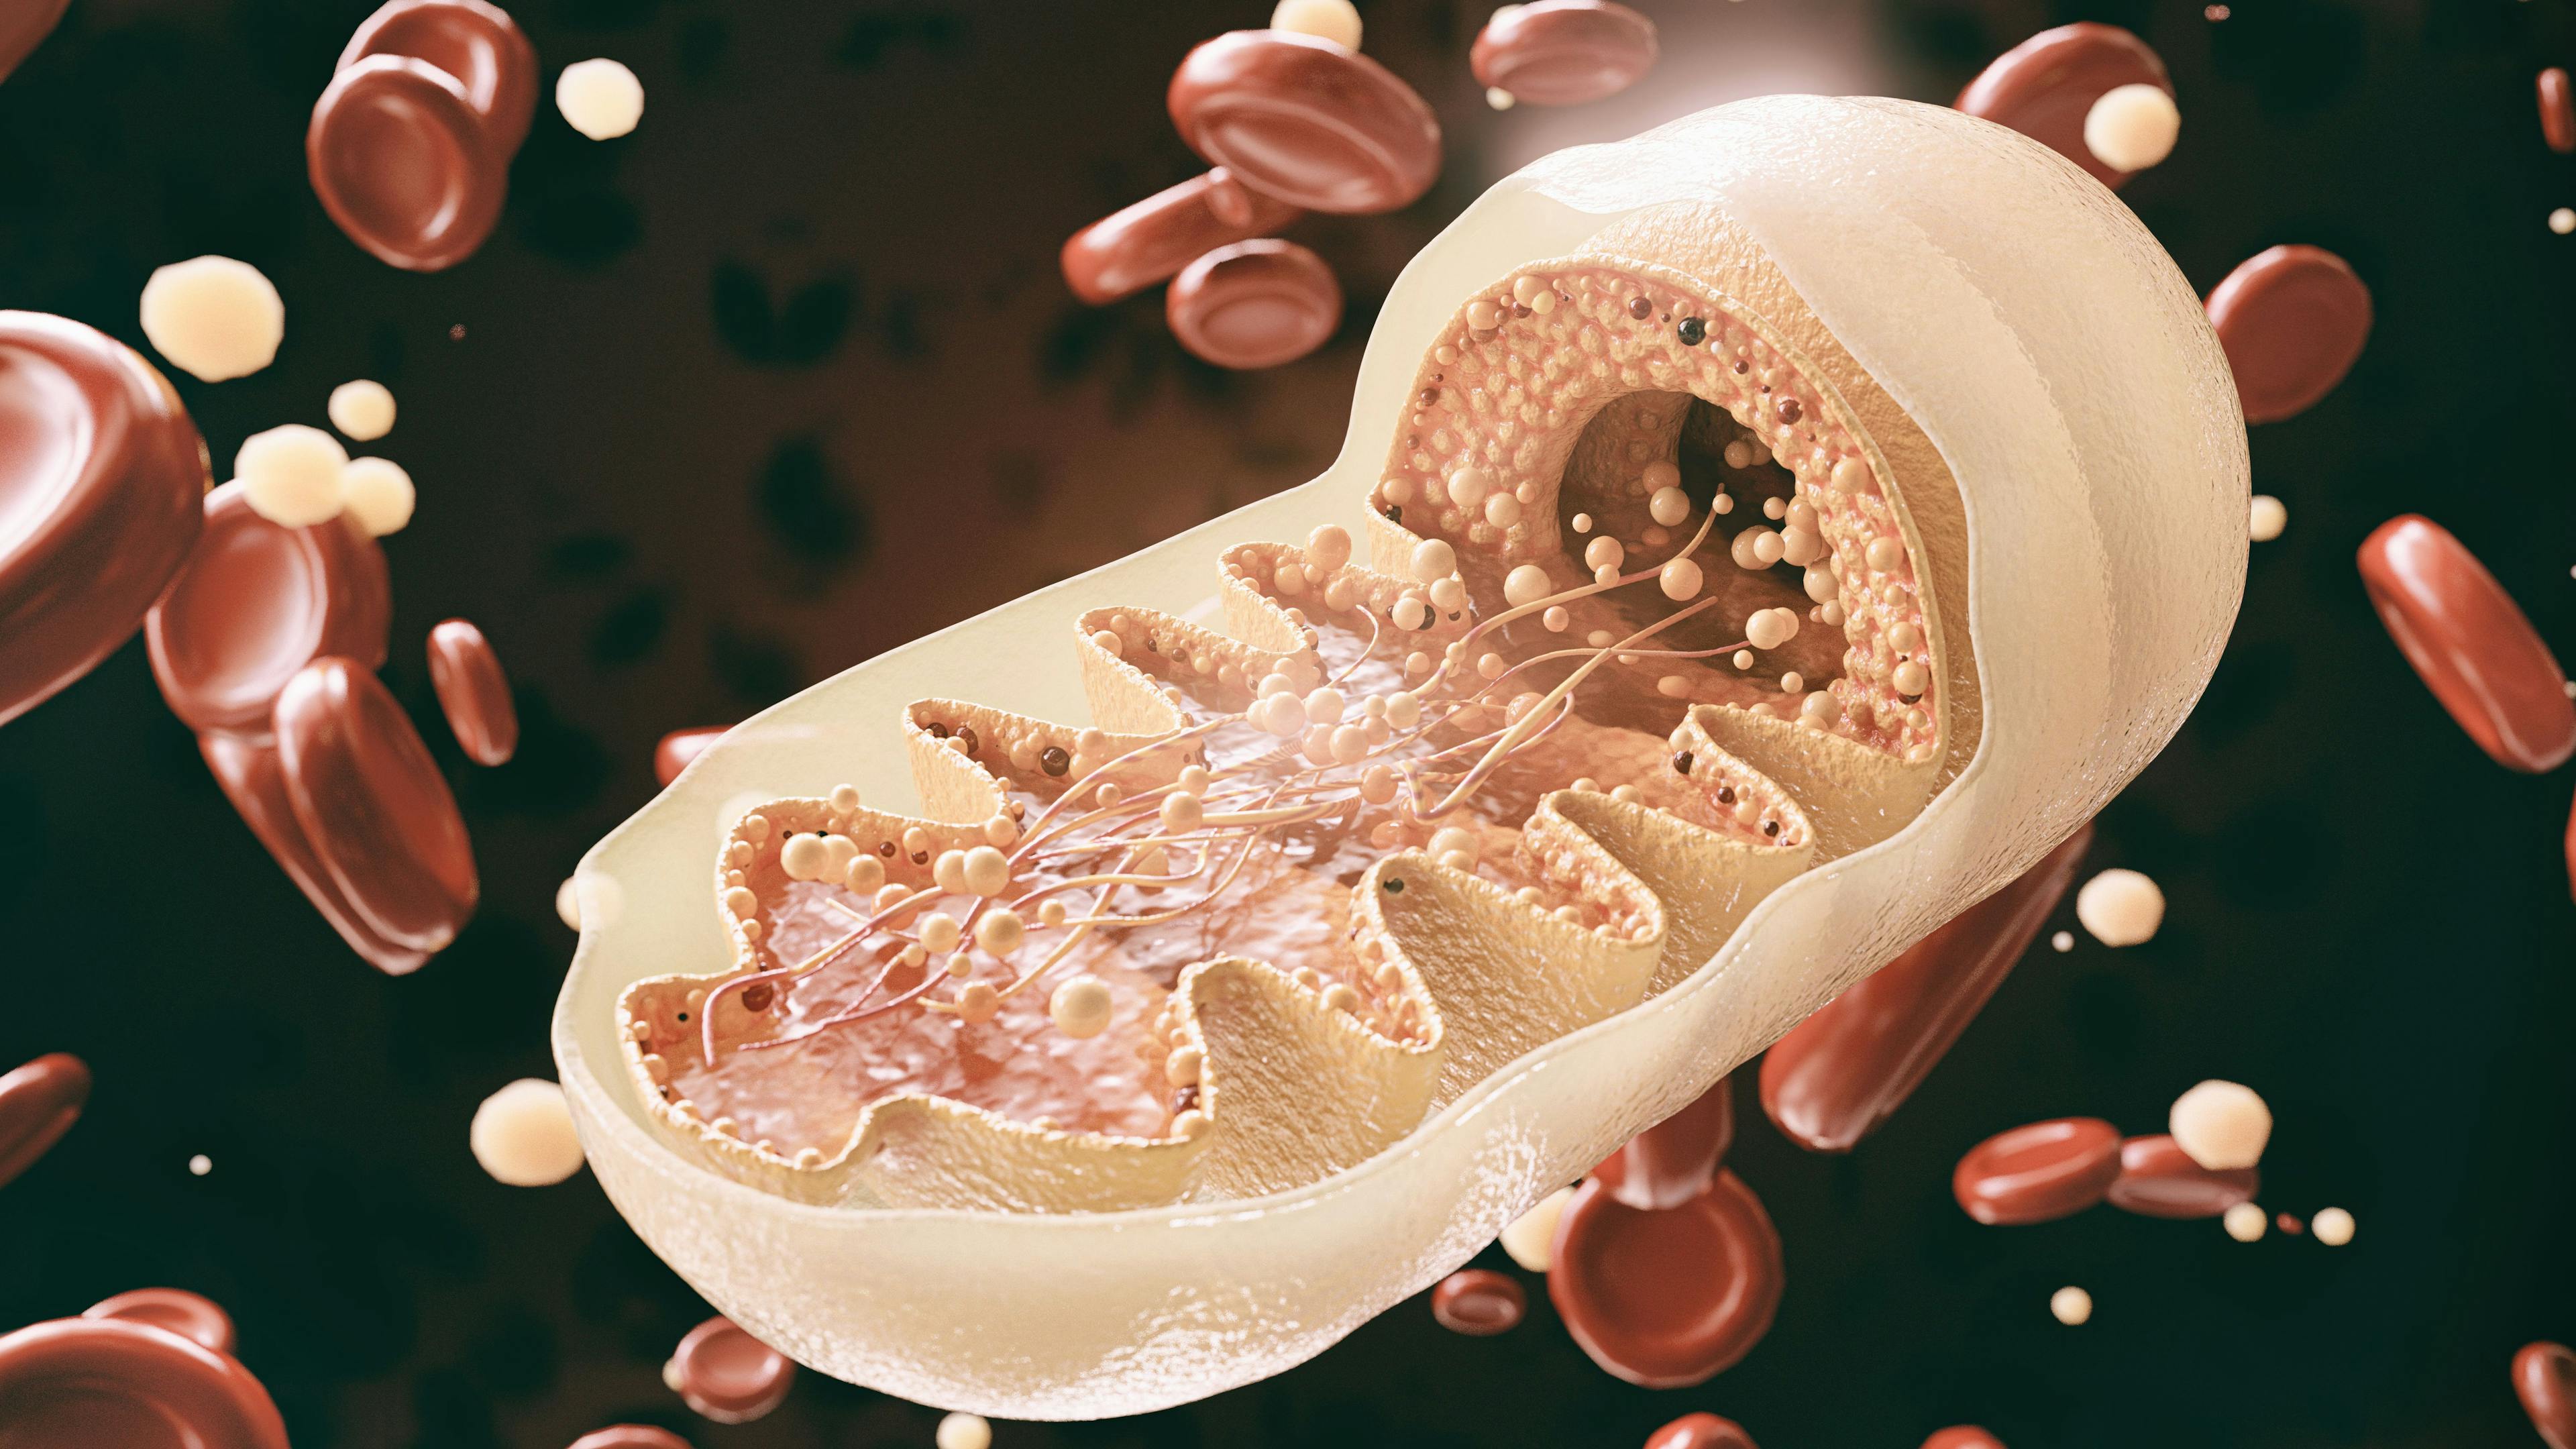 mitochondria cell in close-up - 3D Rendering | Image Credit: © crevis - stock.adobe.com